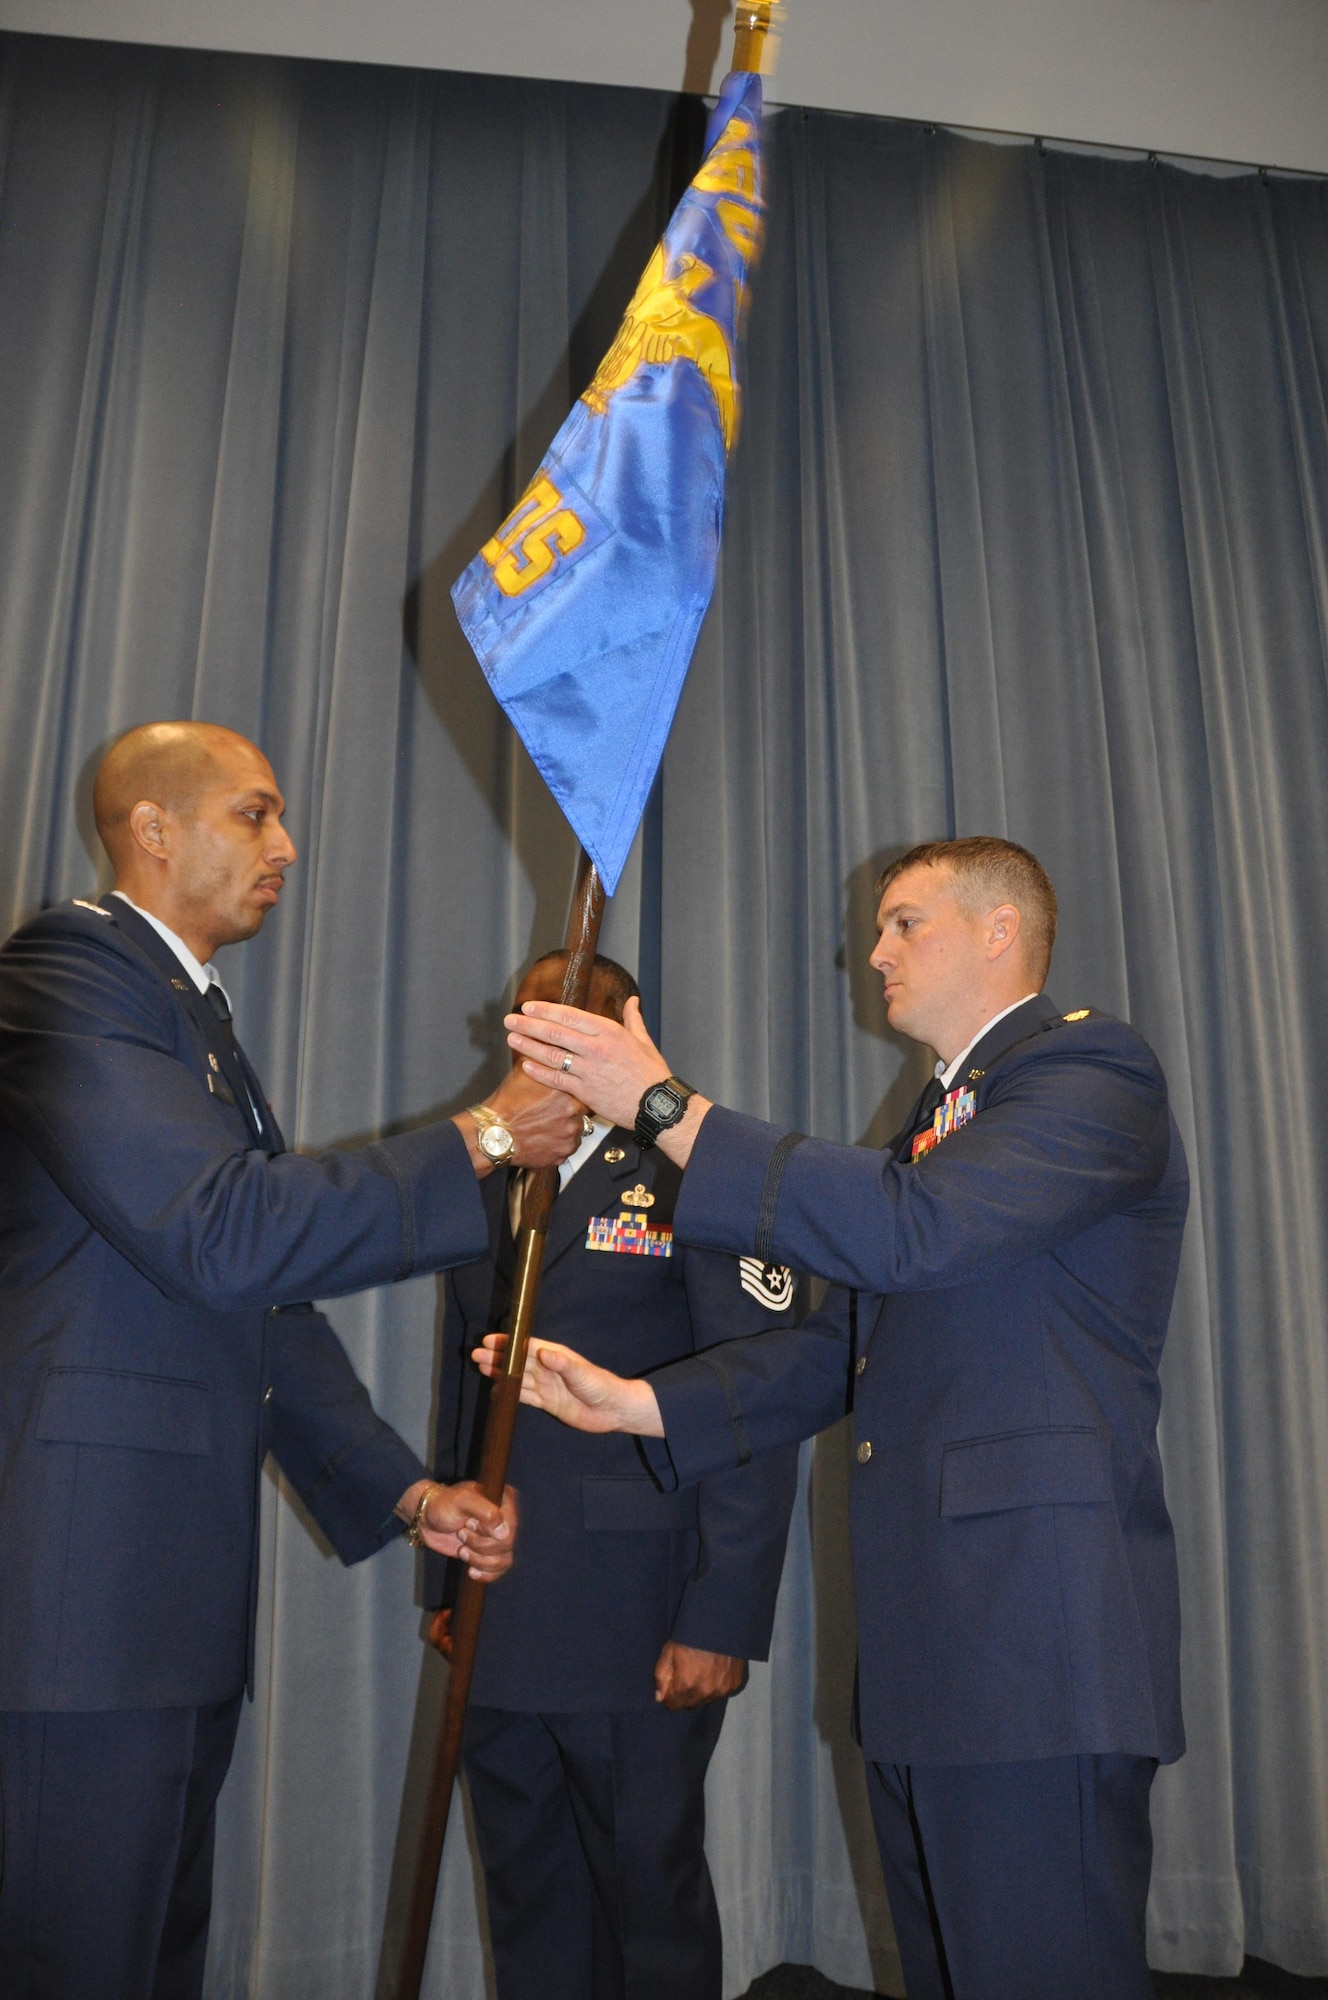 Commander of the 960th Cyberspace Operations Group, Col. Anthony Perkins, left, passes the 689th guidon to Maj. Kevin Deibler, new commander of the 689th Networks Operations Squadron, during an Assumption of Command ceremony Feb. 12, at Gunter Annex. The 689th is the Air Force’s newest Net Ops Squadron in the Cyber fight. (U.S. Air Force photo by Bradley J. Clark)